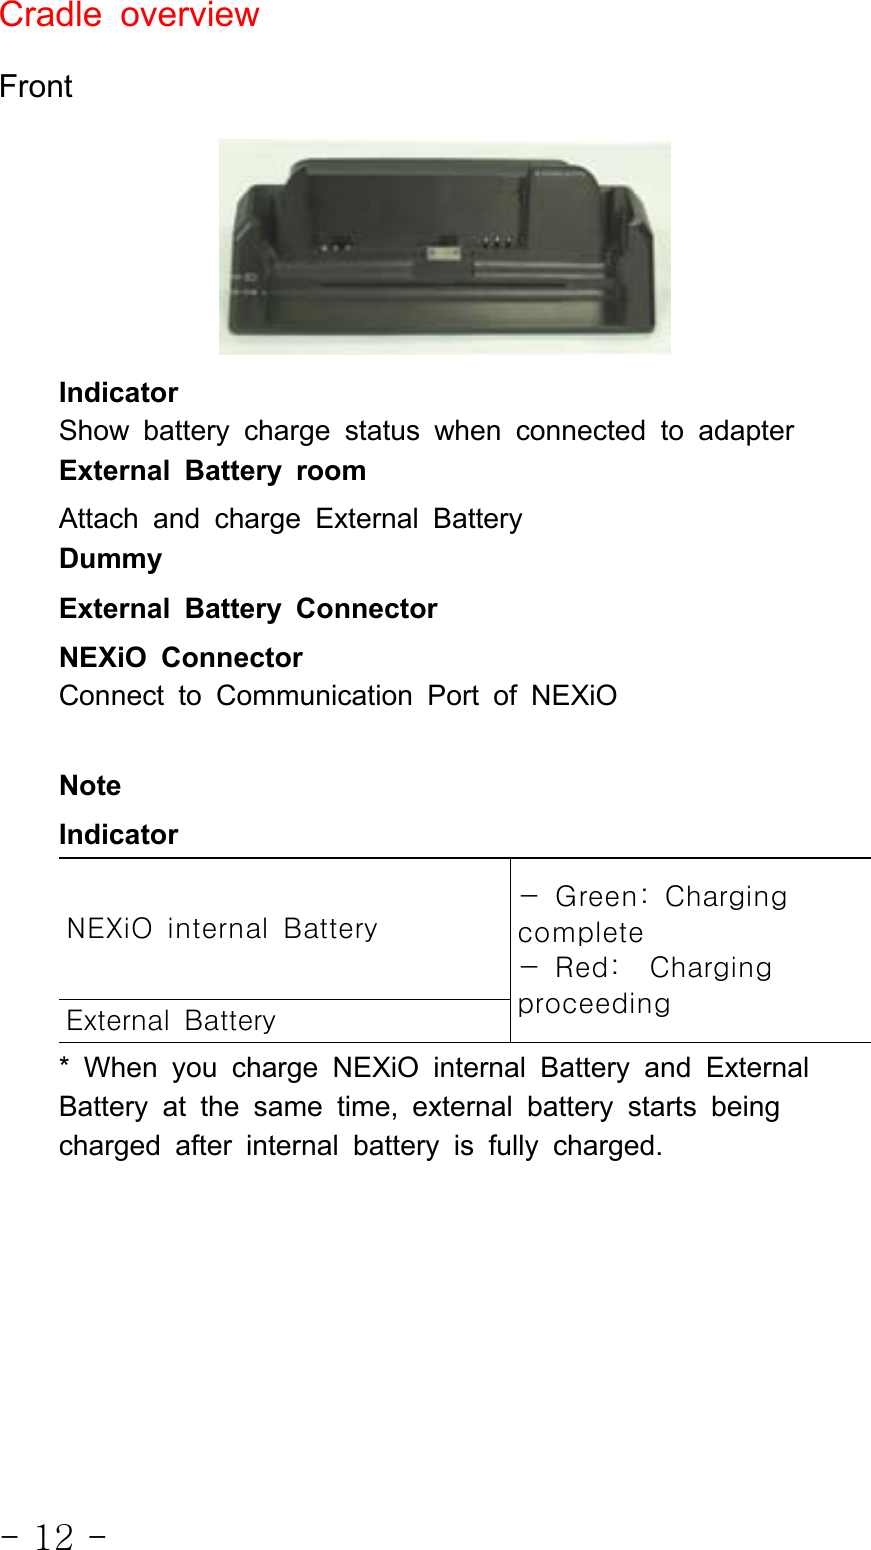 - 12 -Cradle overviewFrontIndicatorShow battery charge status when connected to adapterExternal Battery roomAttach and charge External BatteryDummyExternal Battery ConnectorNEXiO ConnectorConnect to Communication Port of NEXiONoteIndicatorNEXiO internal Battery- Green: Chargingcomplete- Red: ChargingproceedingExternal Battery* When you charge NEXiO internal Battery and ExternalBattery at the same time, external battery starts beingcharged after internal battery is fully charged.